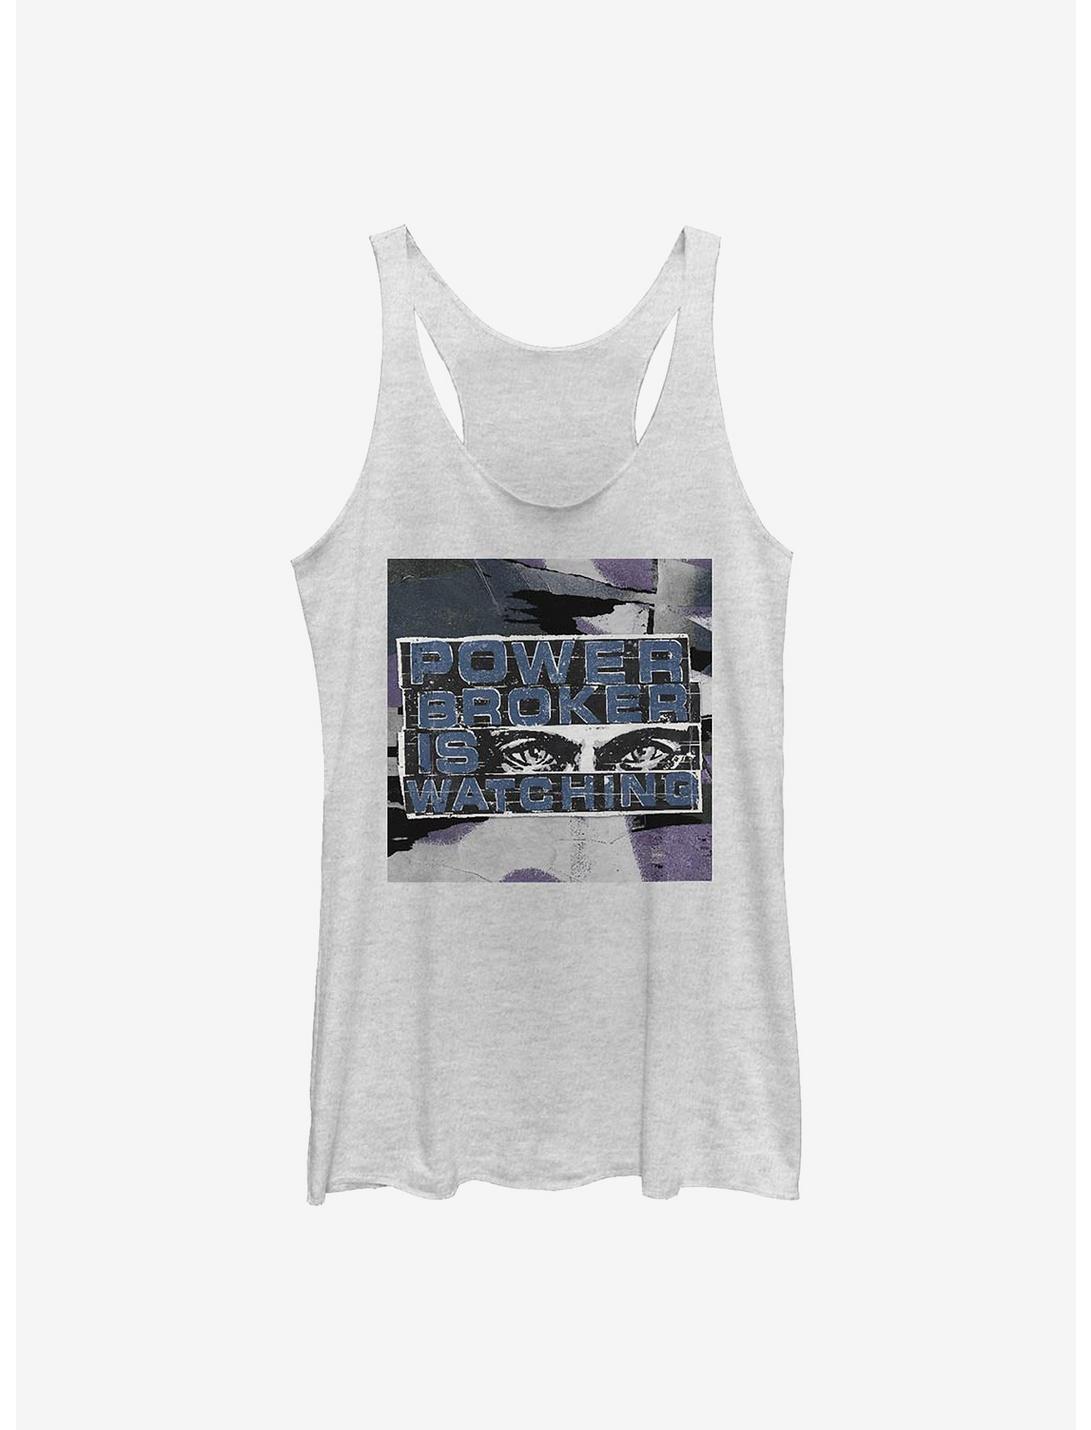 Marvel The Falcon And The Winter Soldier Meaningful Symbols Girls Tank, WHITE HTR, hi-res